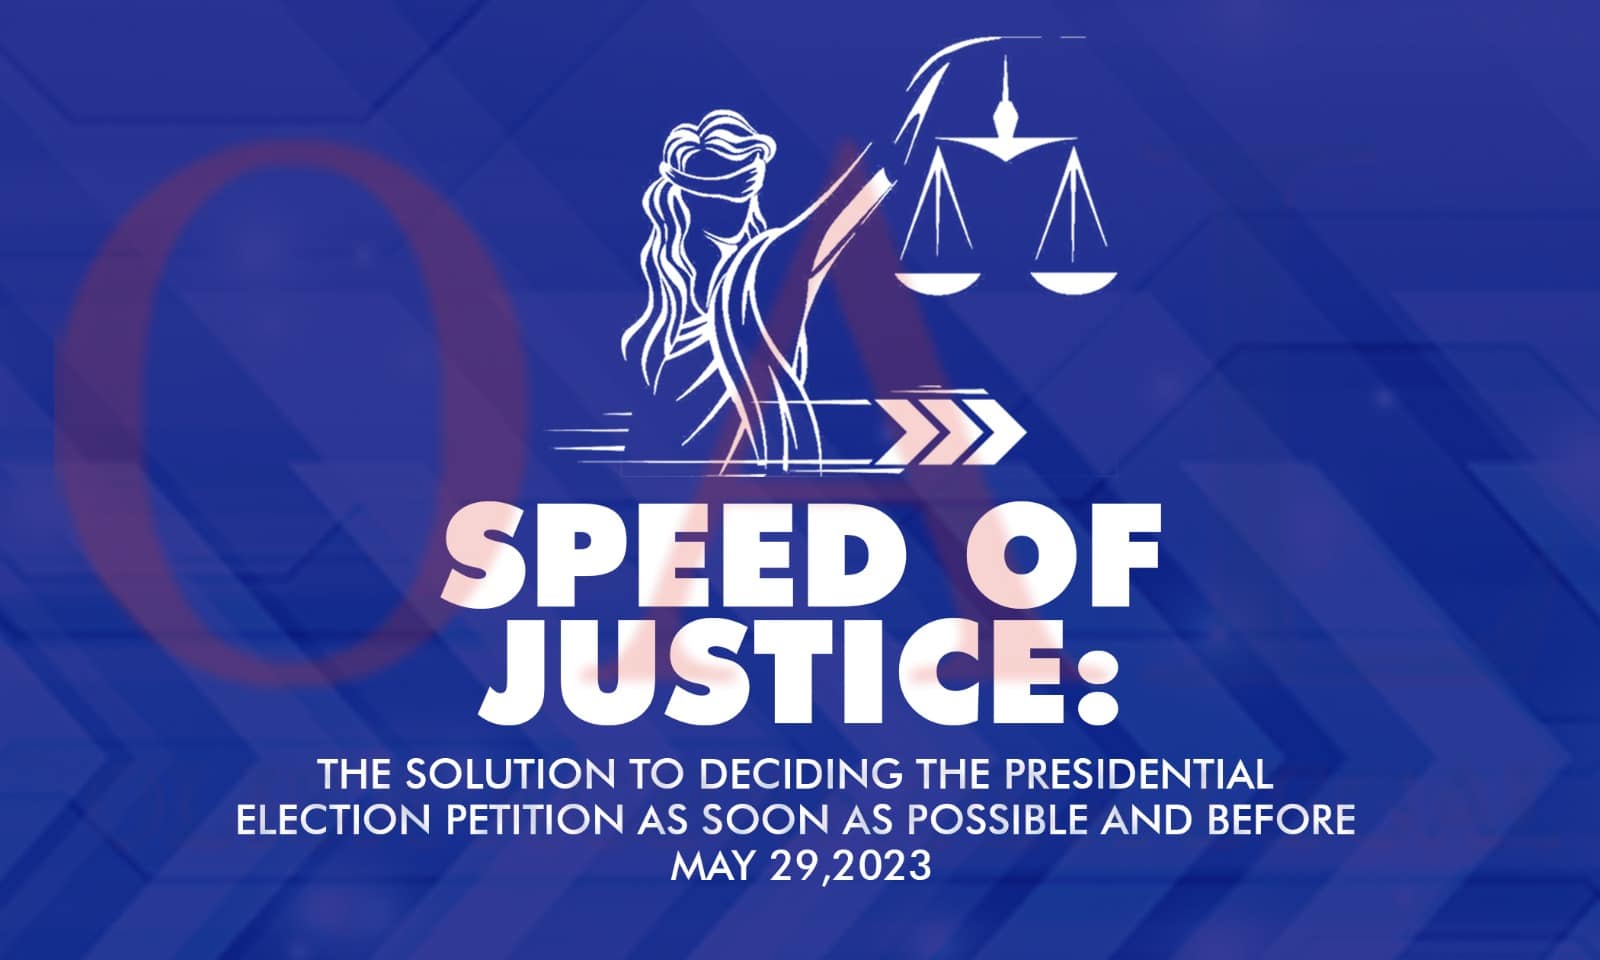 Speed Of Justice: The Solution To Deciding The Presidential Election Petition As Soon As Possible And Before May 29,2023